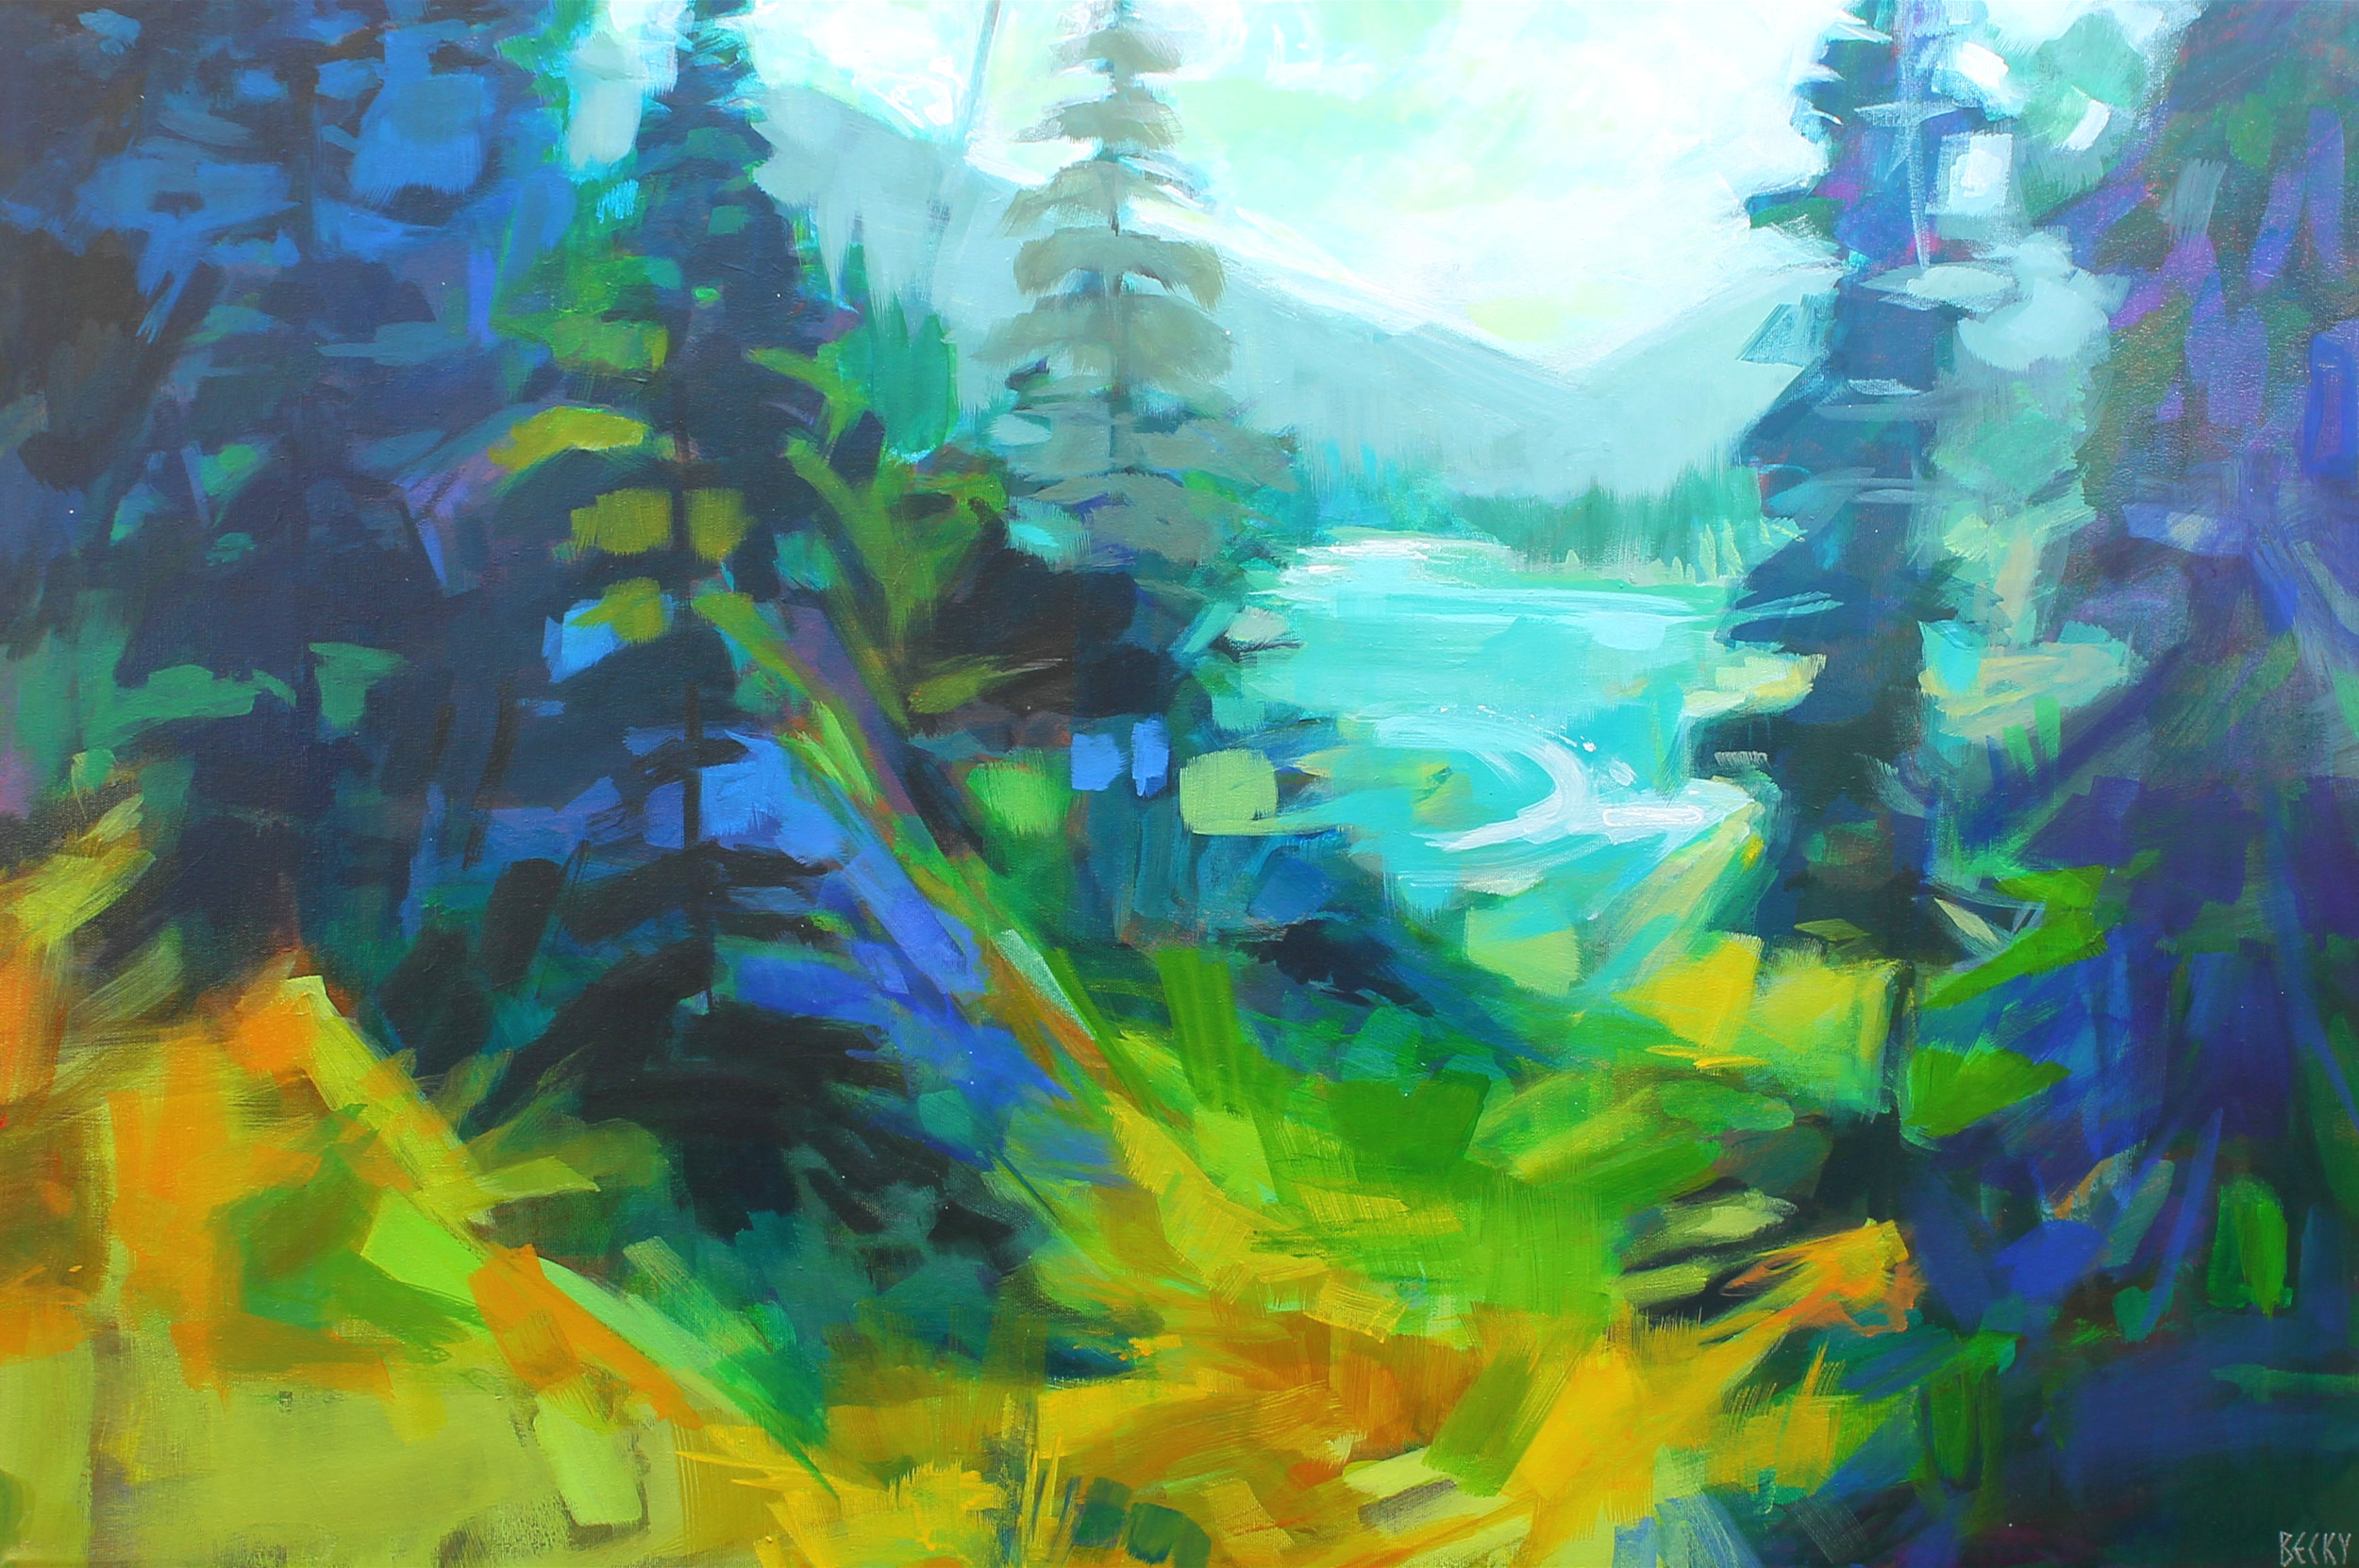 Far and Away, acrylic abstract landscape painting with trees in the foreground and mountains and a lake peeking through in the background by Becky Holuk | Effusion Art Gallery + Cast Glass Studio, Invermere BC